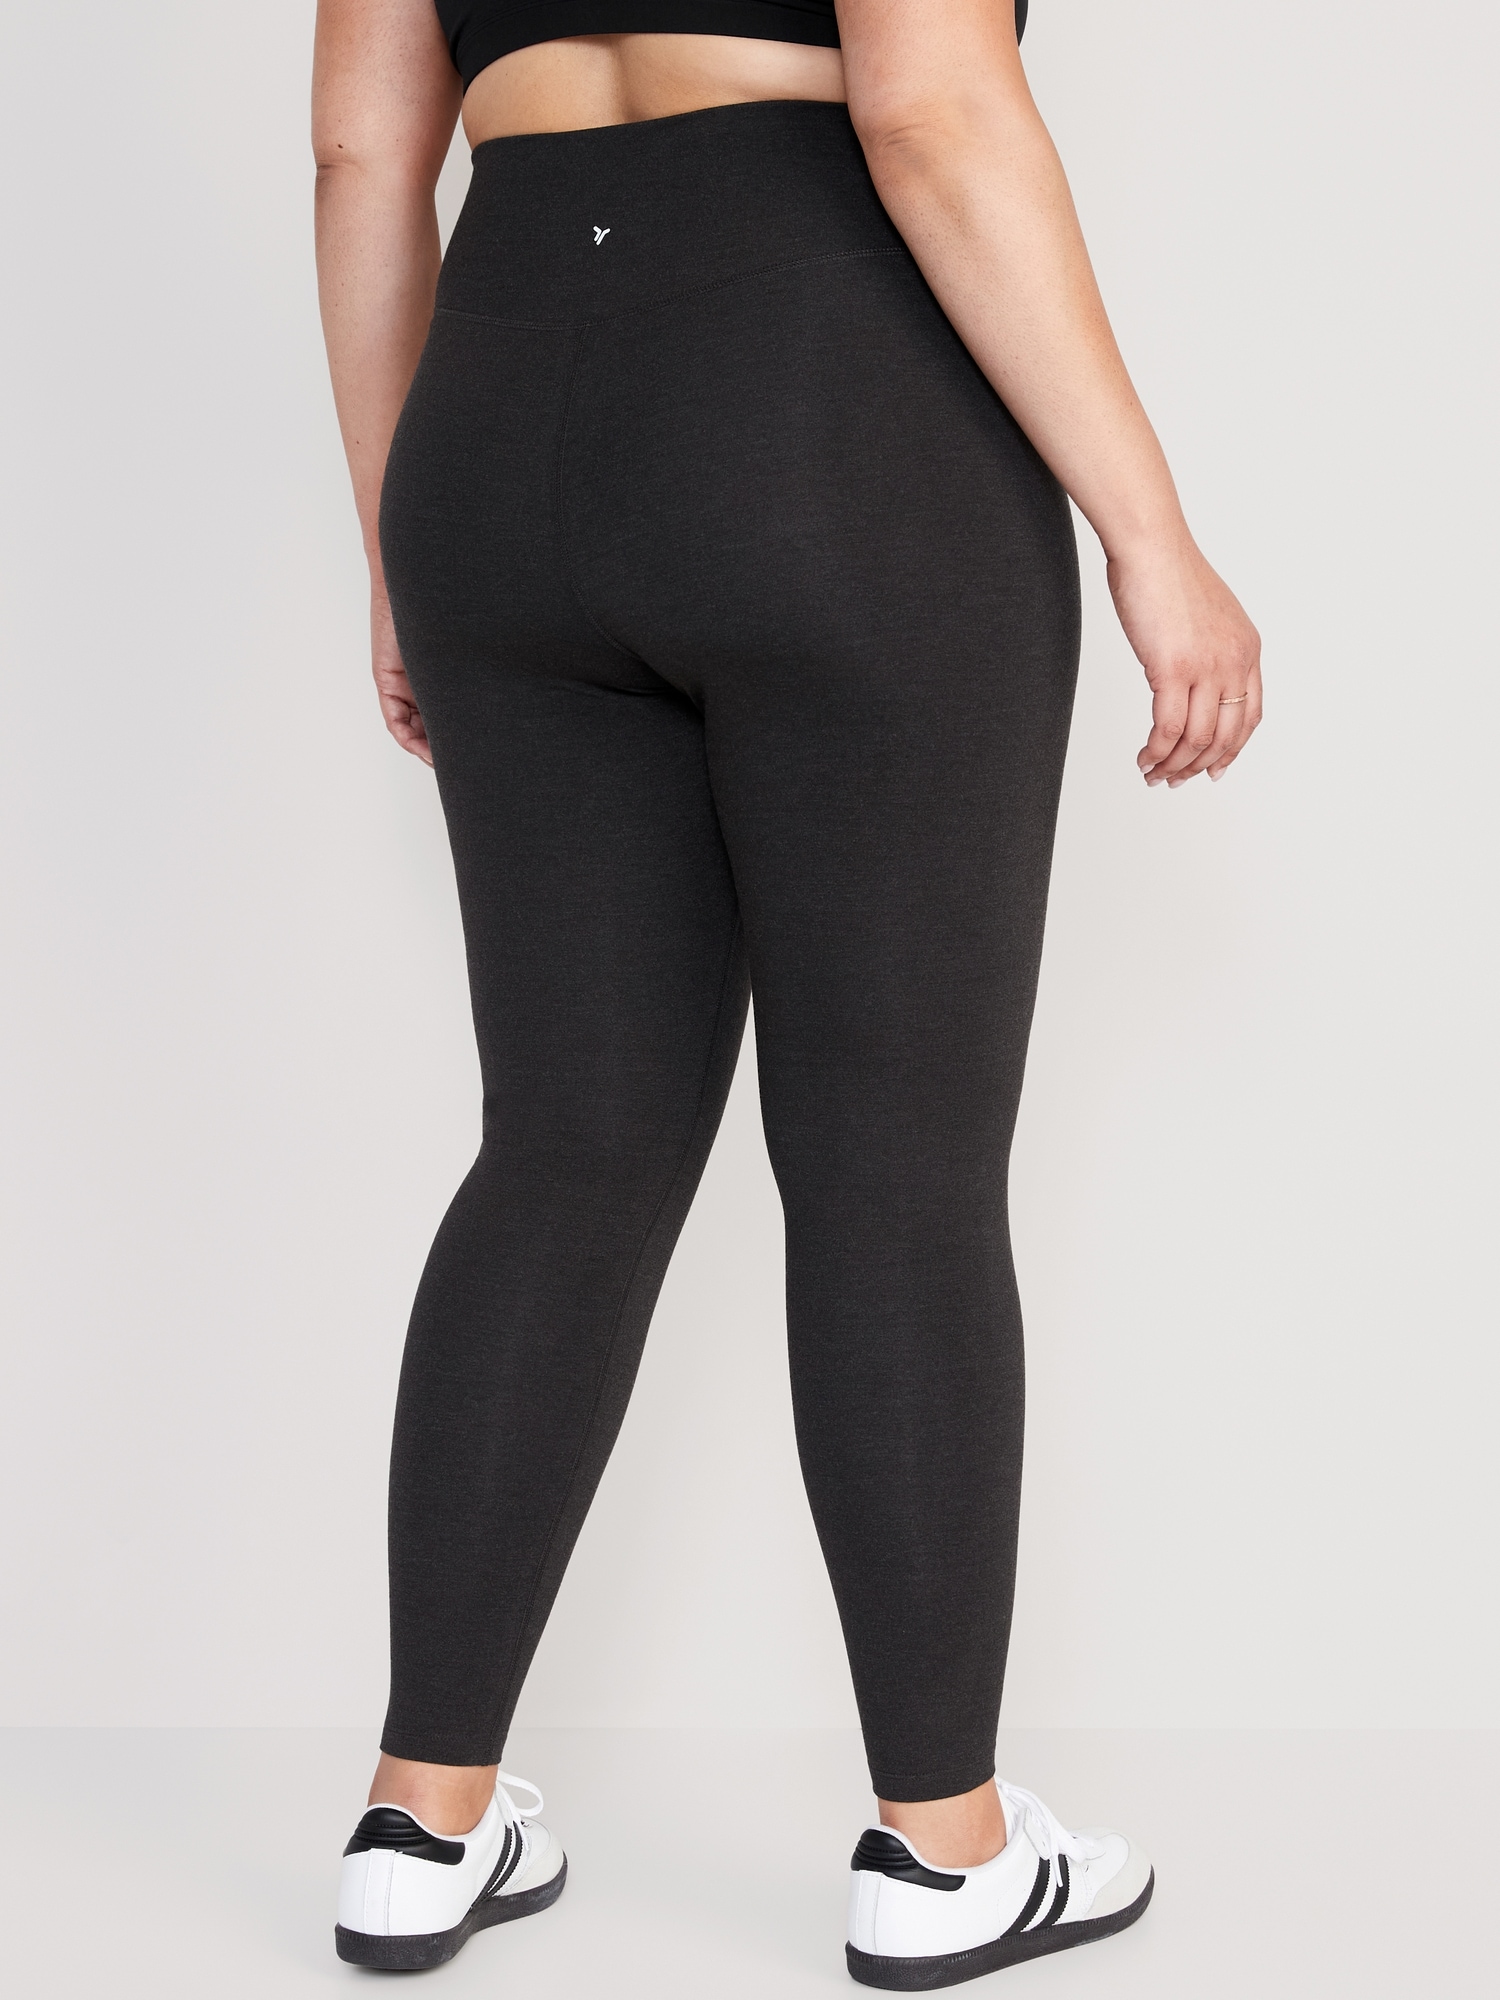 Extra High-Waisted PowerChill Leggings | Old Navy